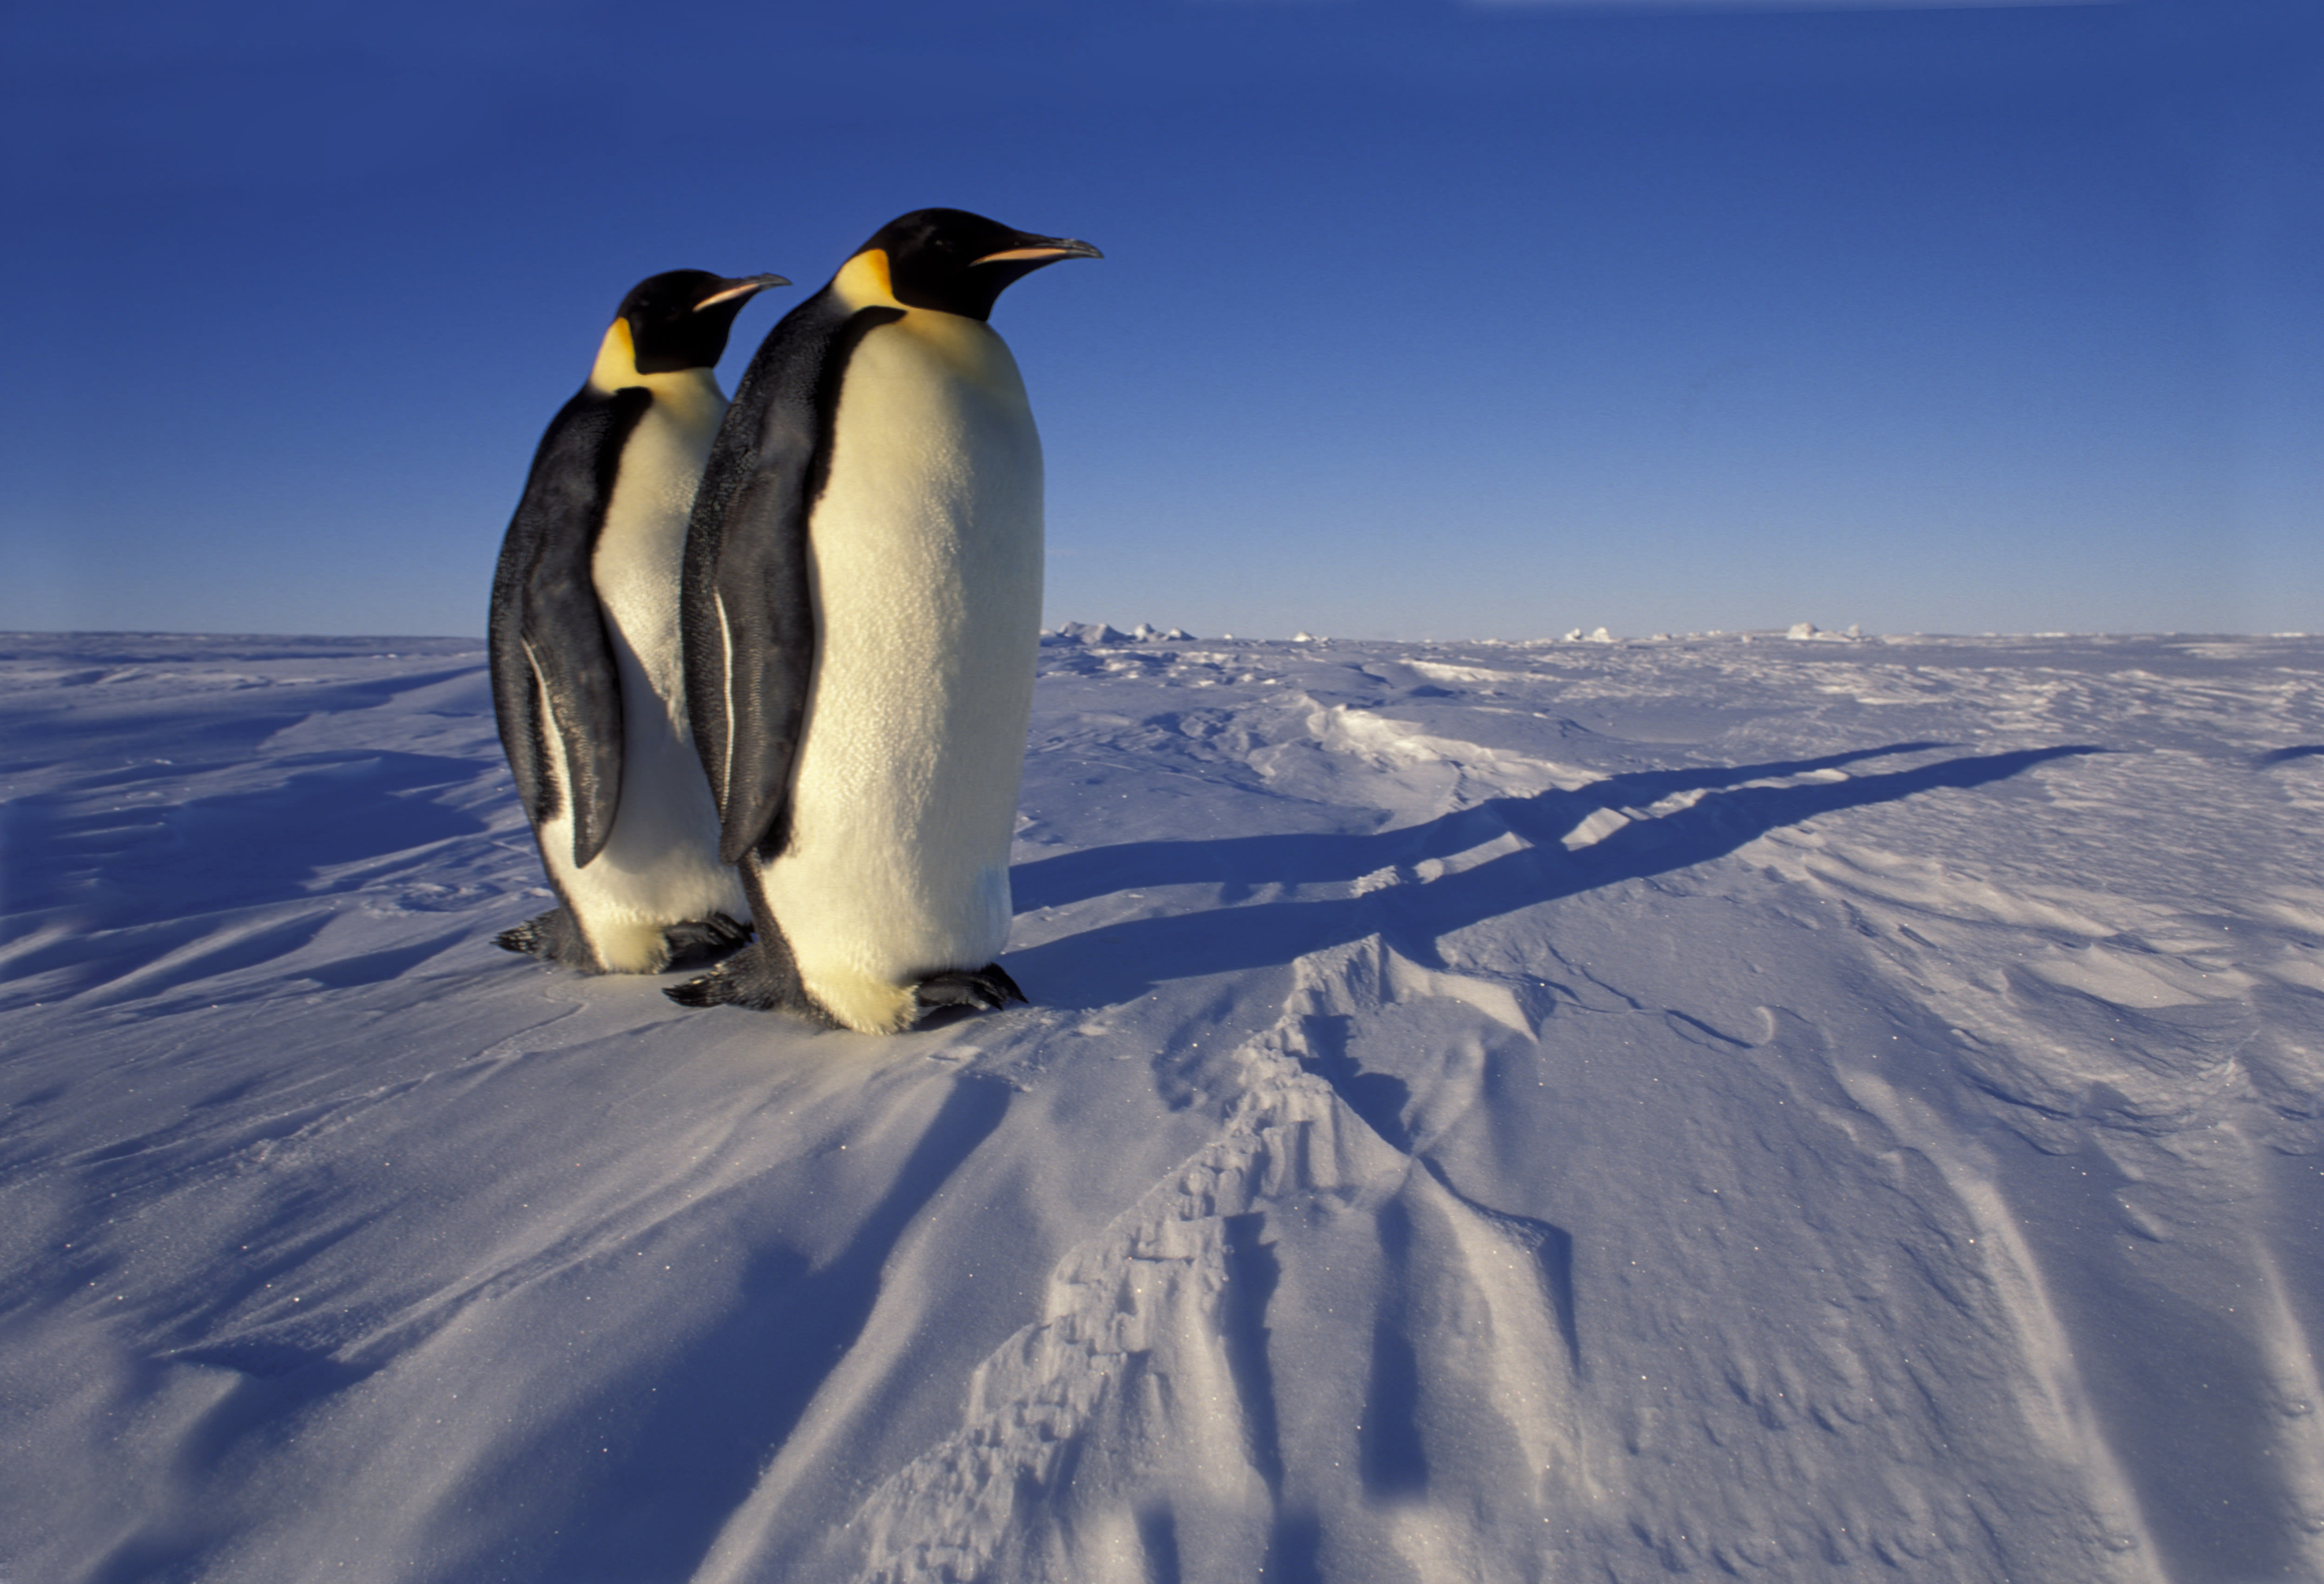 Antarctica's Ozone Hole Is Persisting Later Into the Year, Raising Concerns for Wildlife